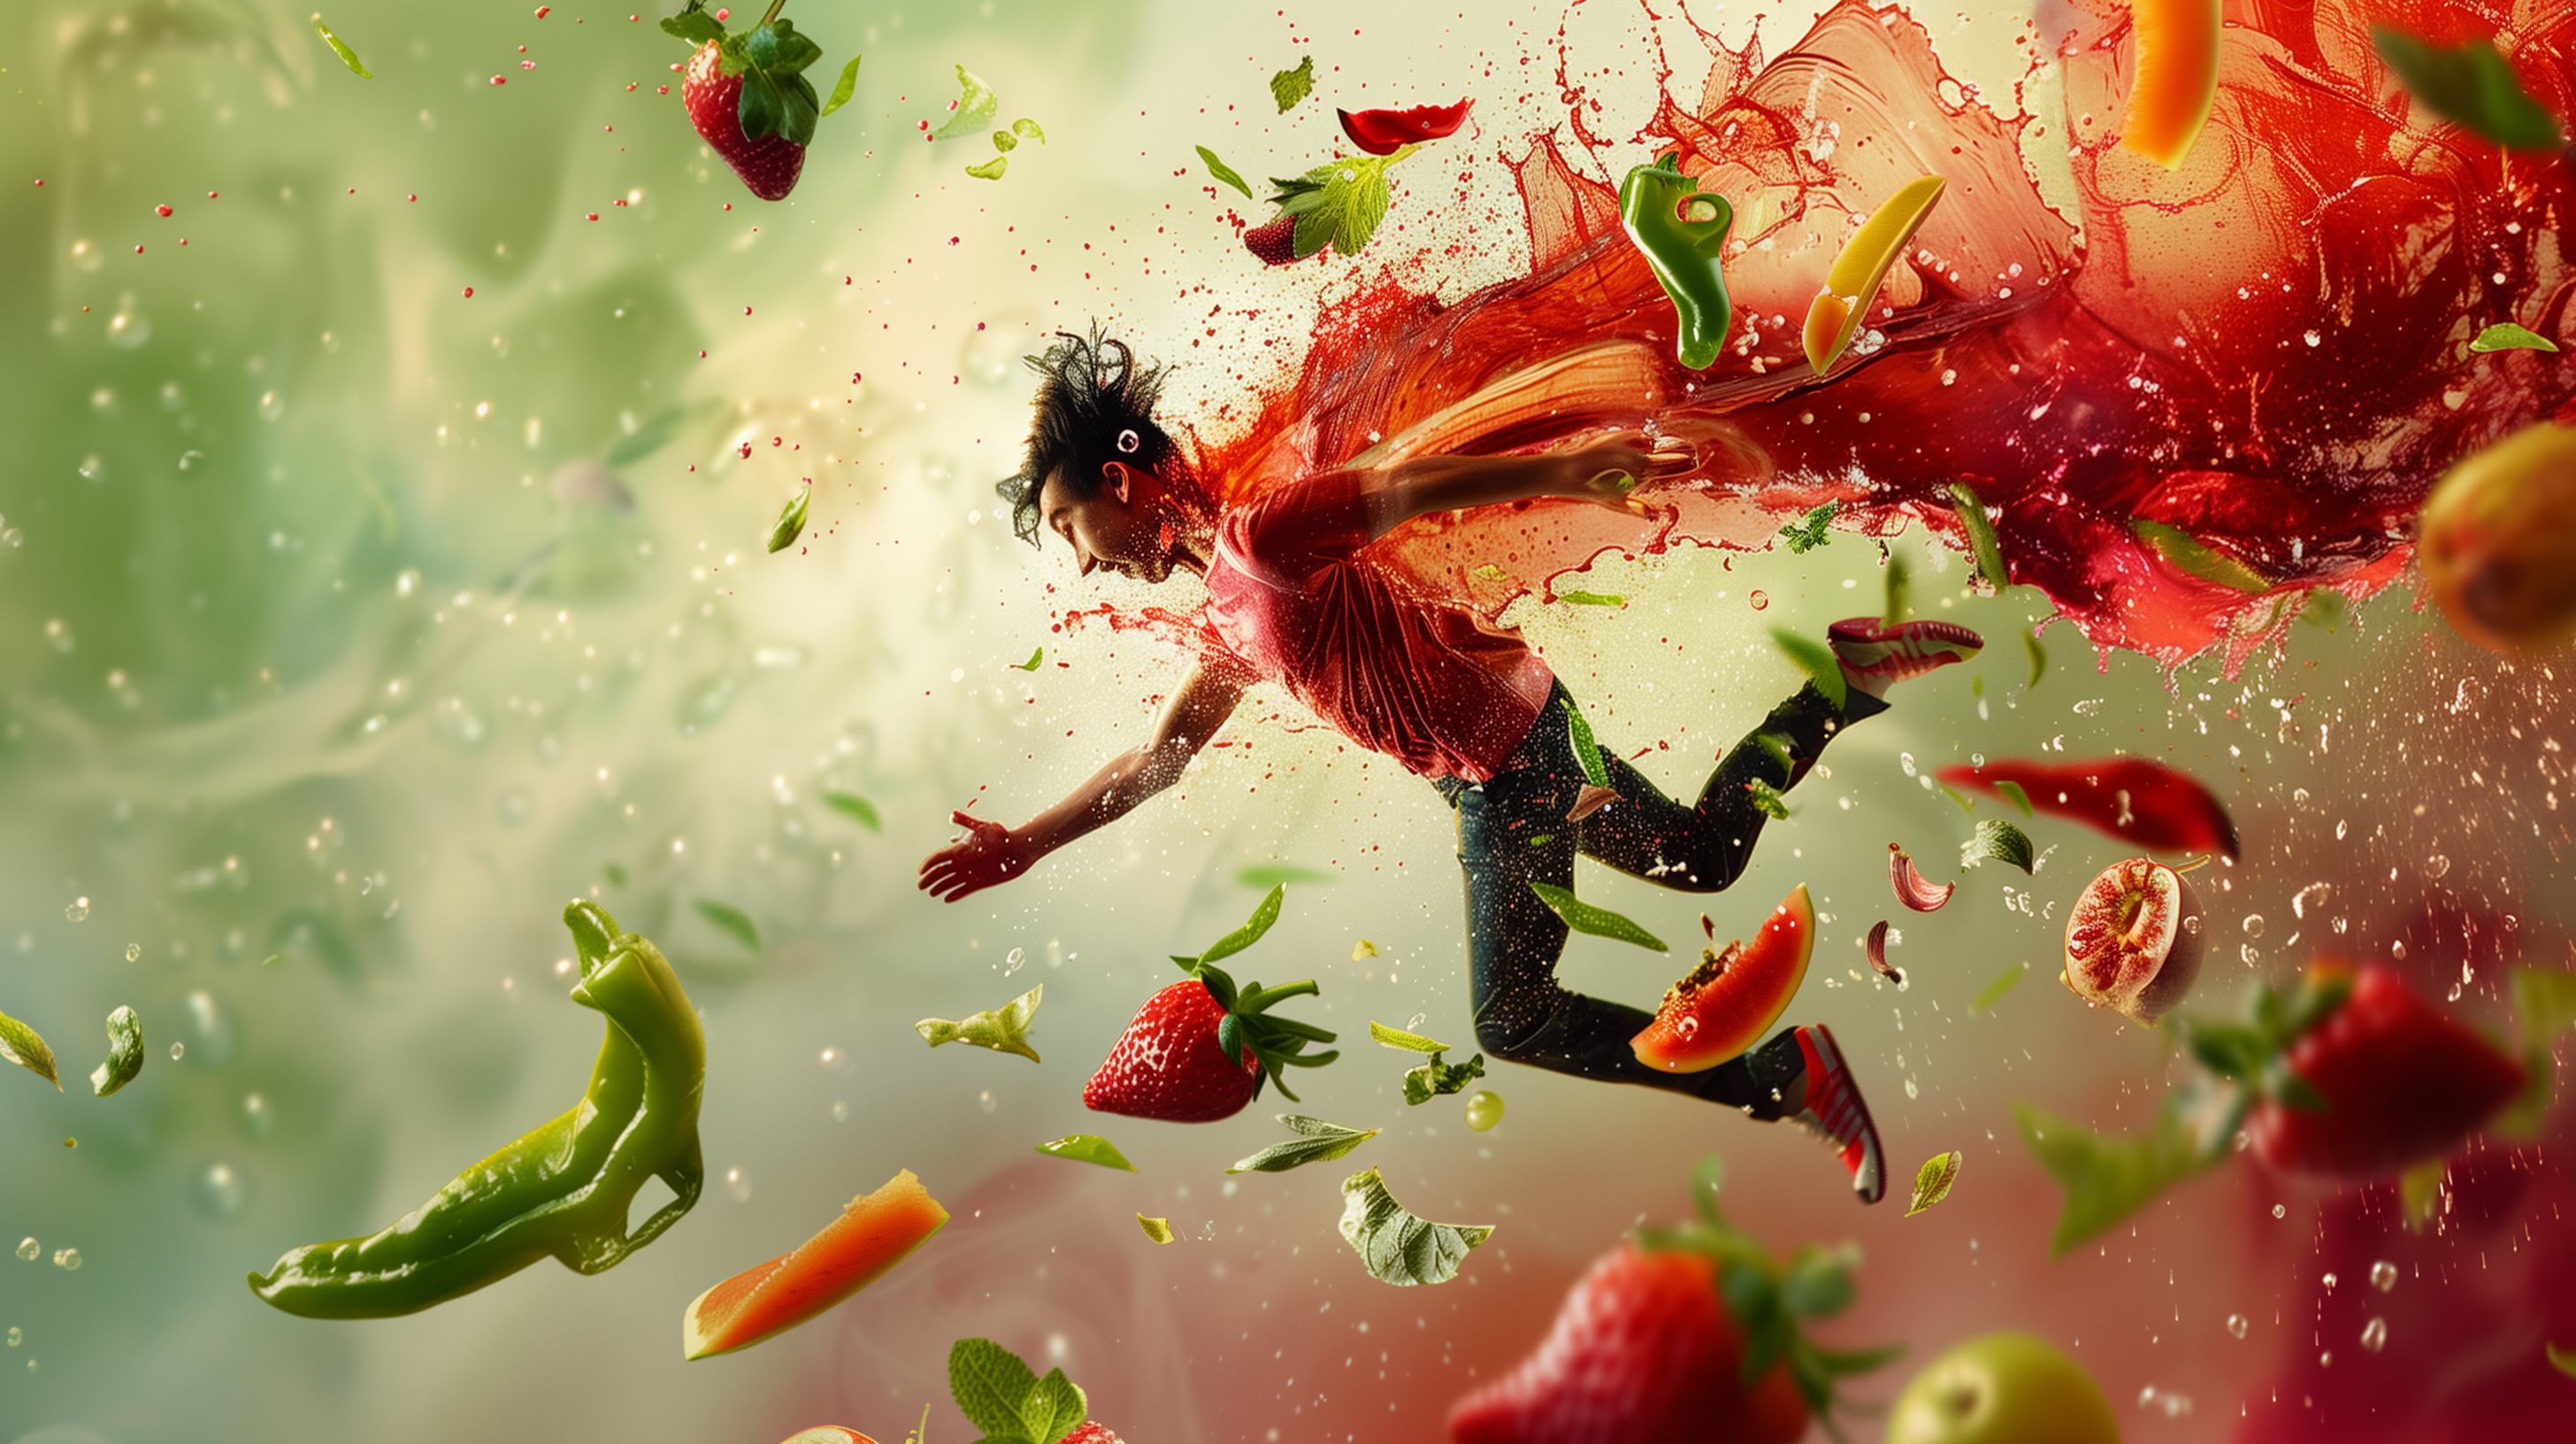 ibrant, energetic person mid-jump with a backdrop of fresh red and green vegetables and fruits blending into a whirl of liquid